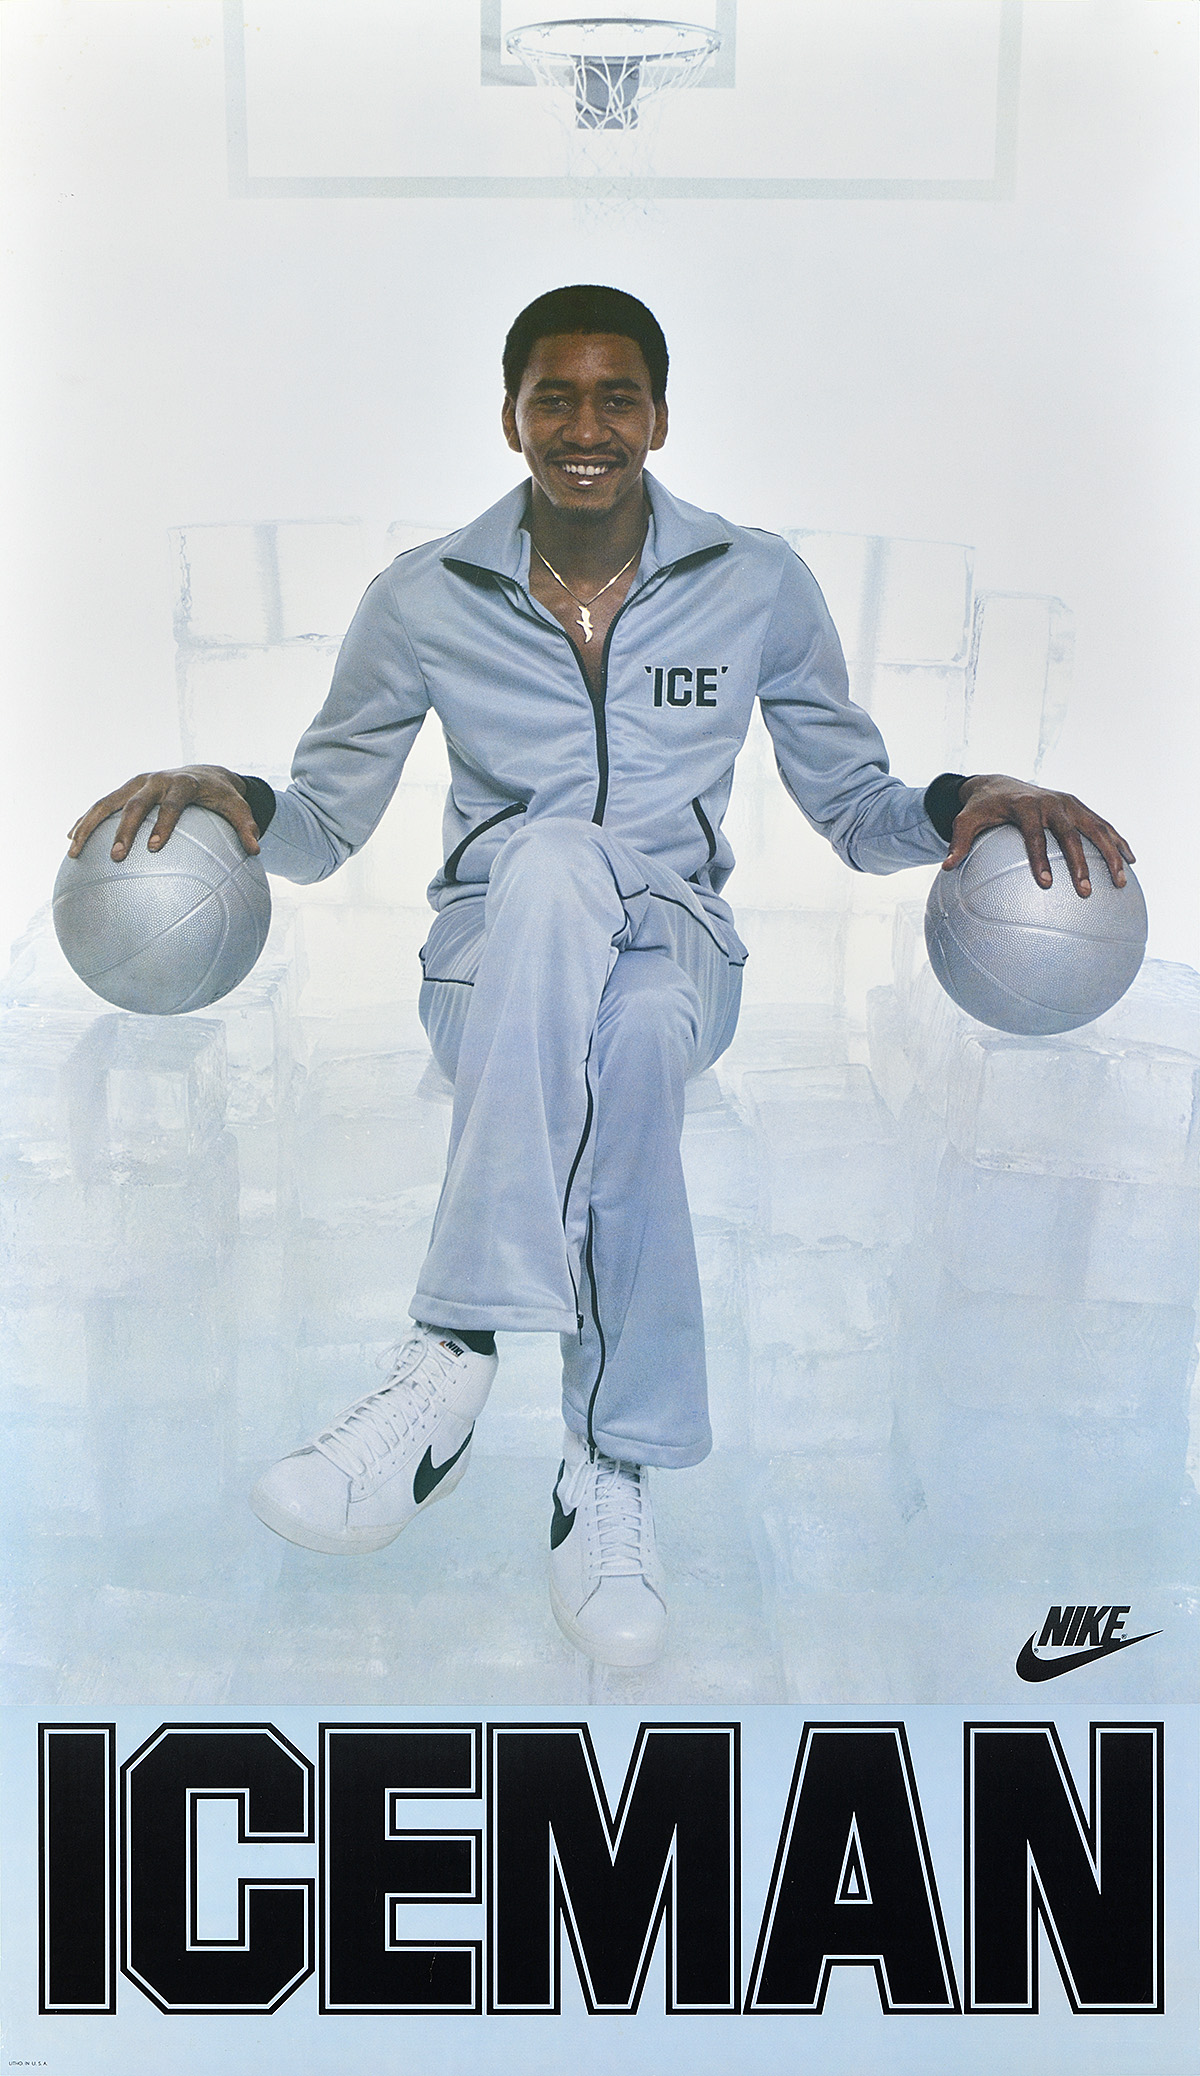 Poster of a man in a track suit holding two basketballs on an ice throne.